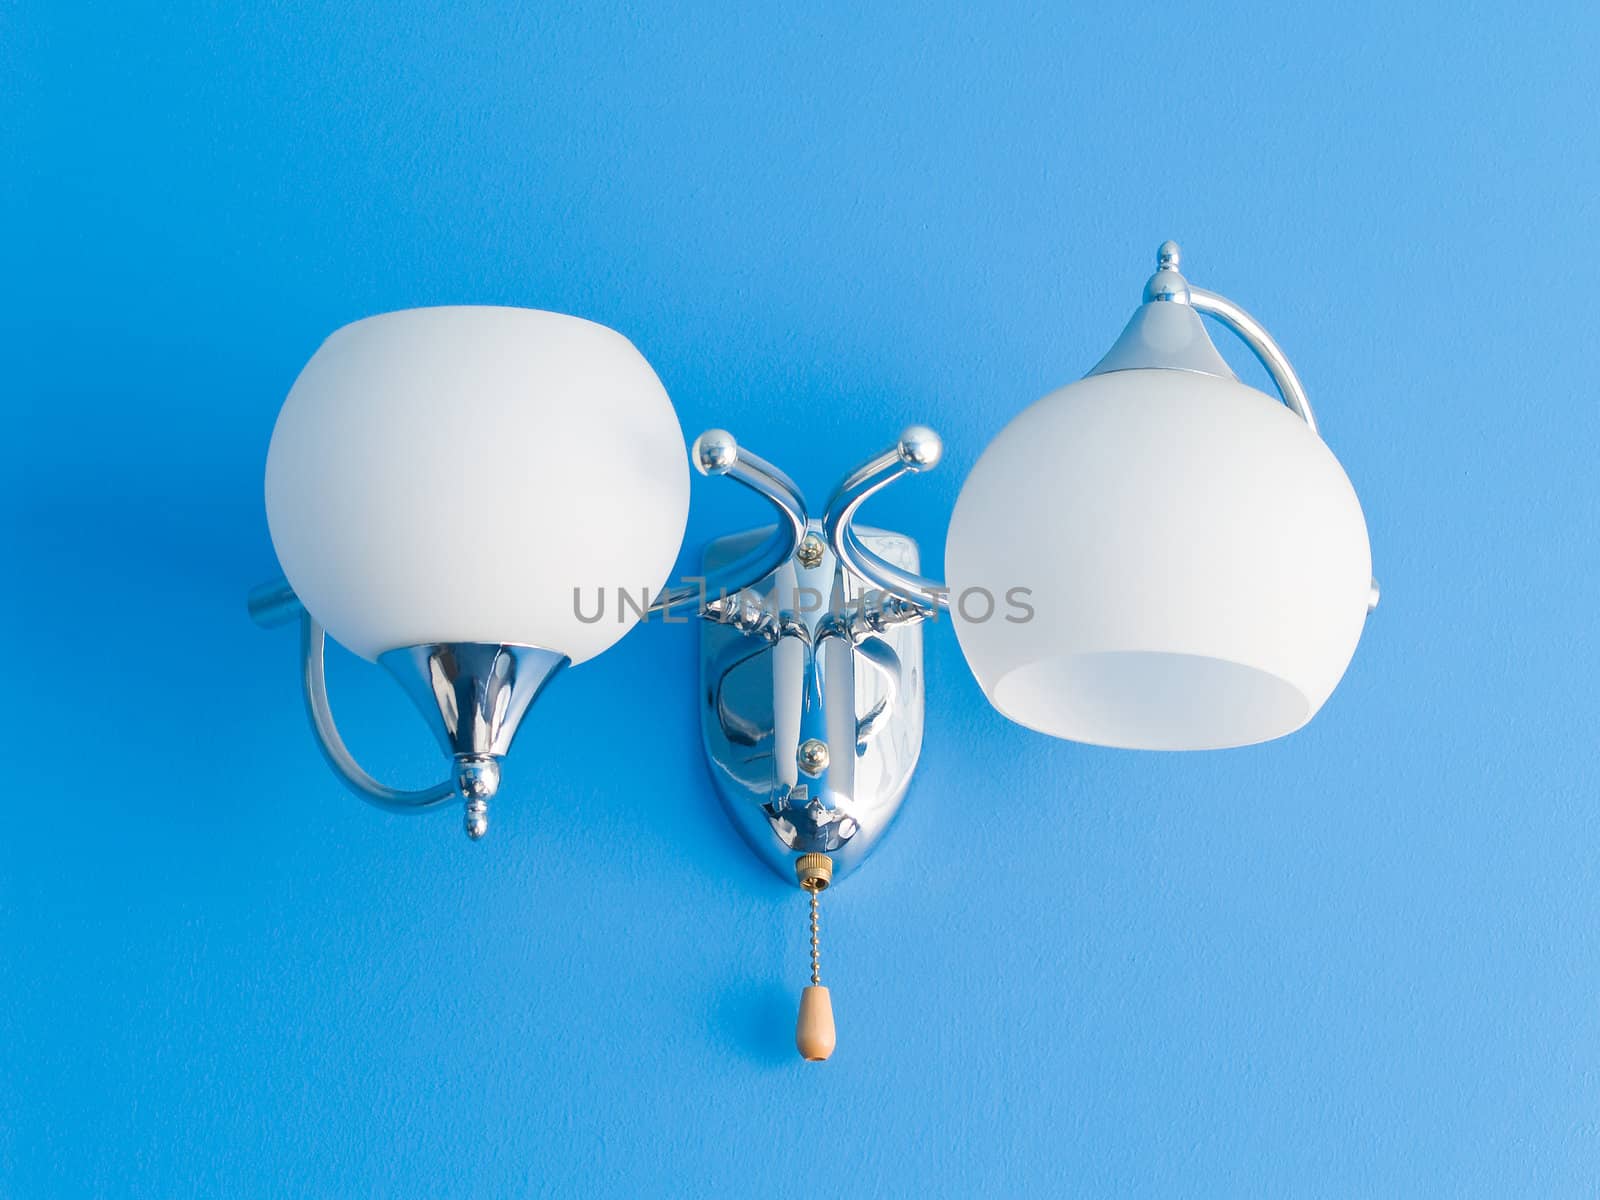 White lamp on blue texturized wall